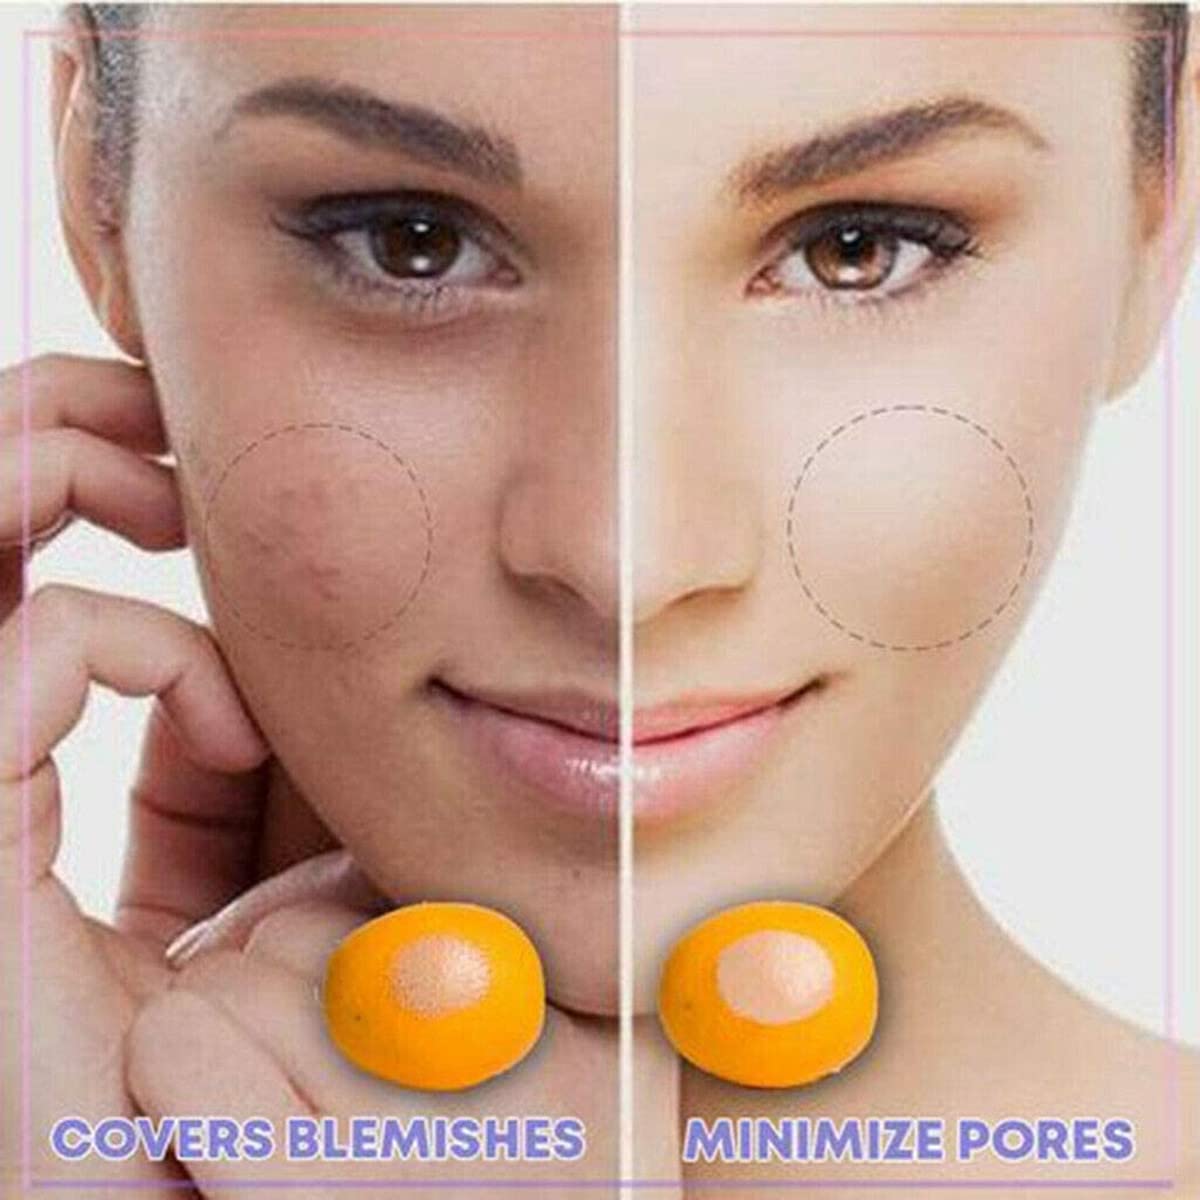 Primer Face Makeup - 3 Colors Correction Facial Cream and Sunscreen,Suitable for Dry, Oil and Sensitive Skin, Moisturizing, Long-Lasting, Water and Sweat Resistant